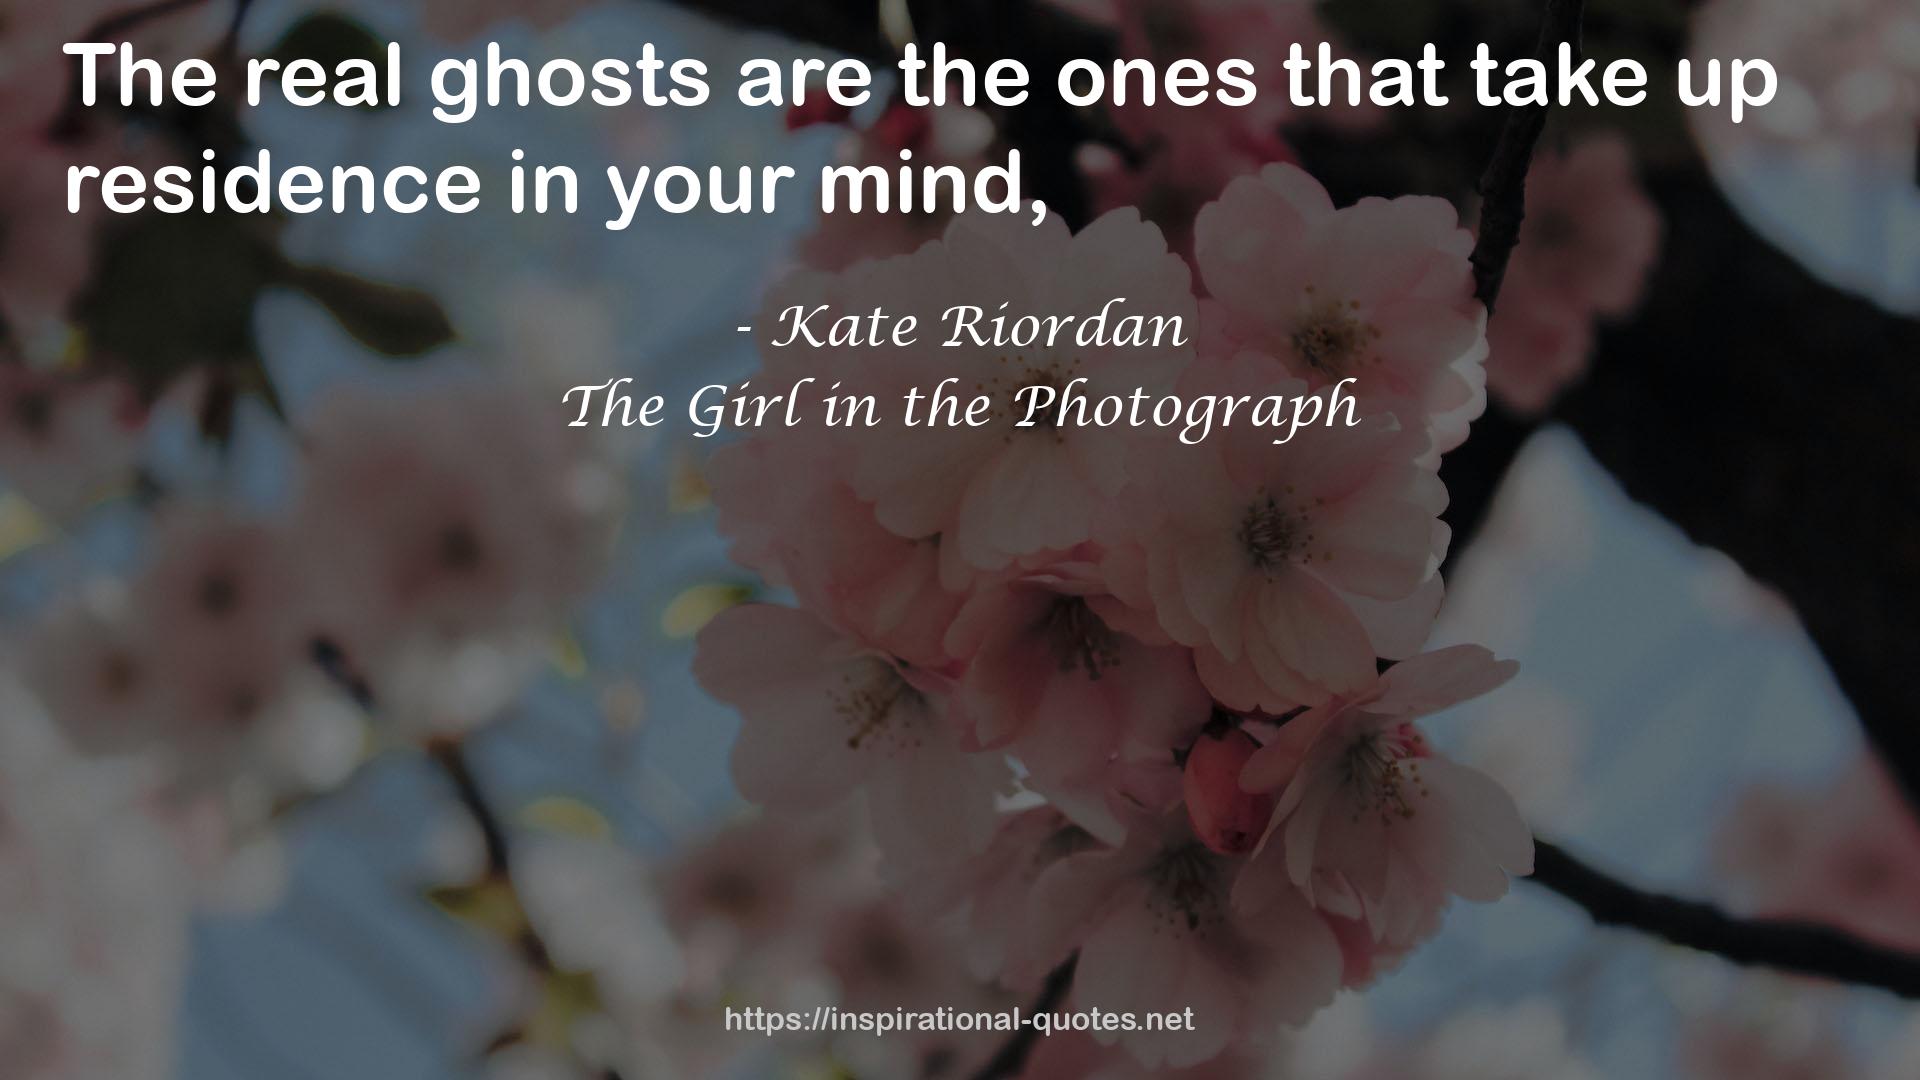 The Girl in the Photograph QUOTES